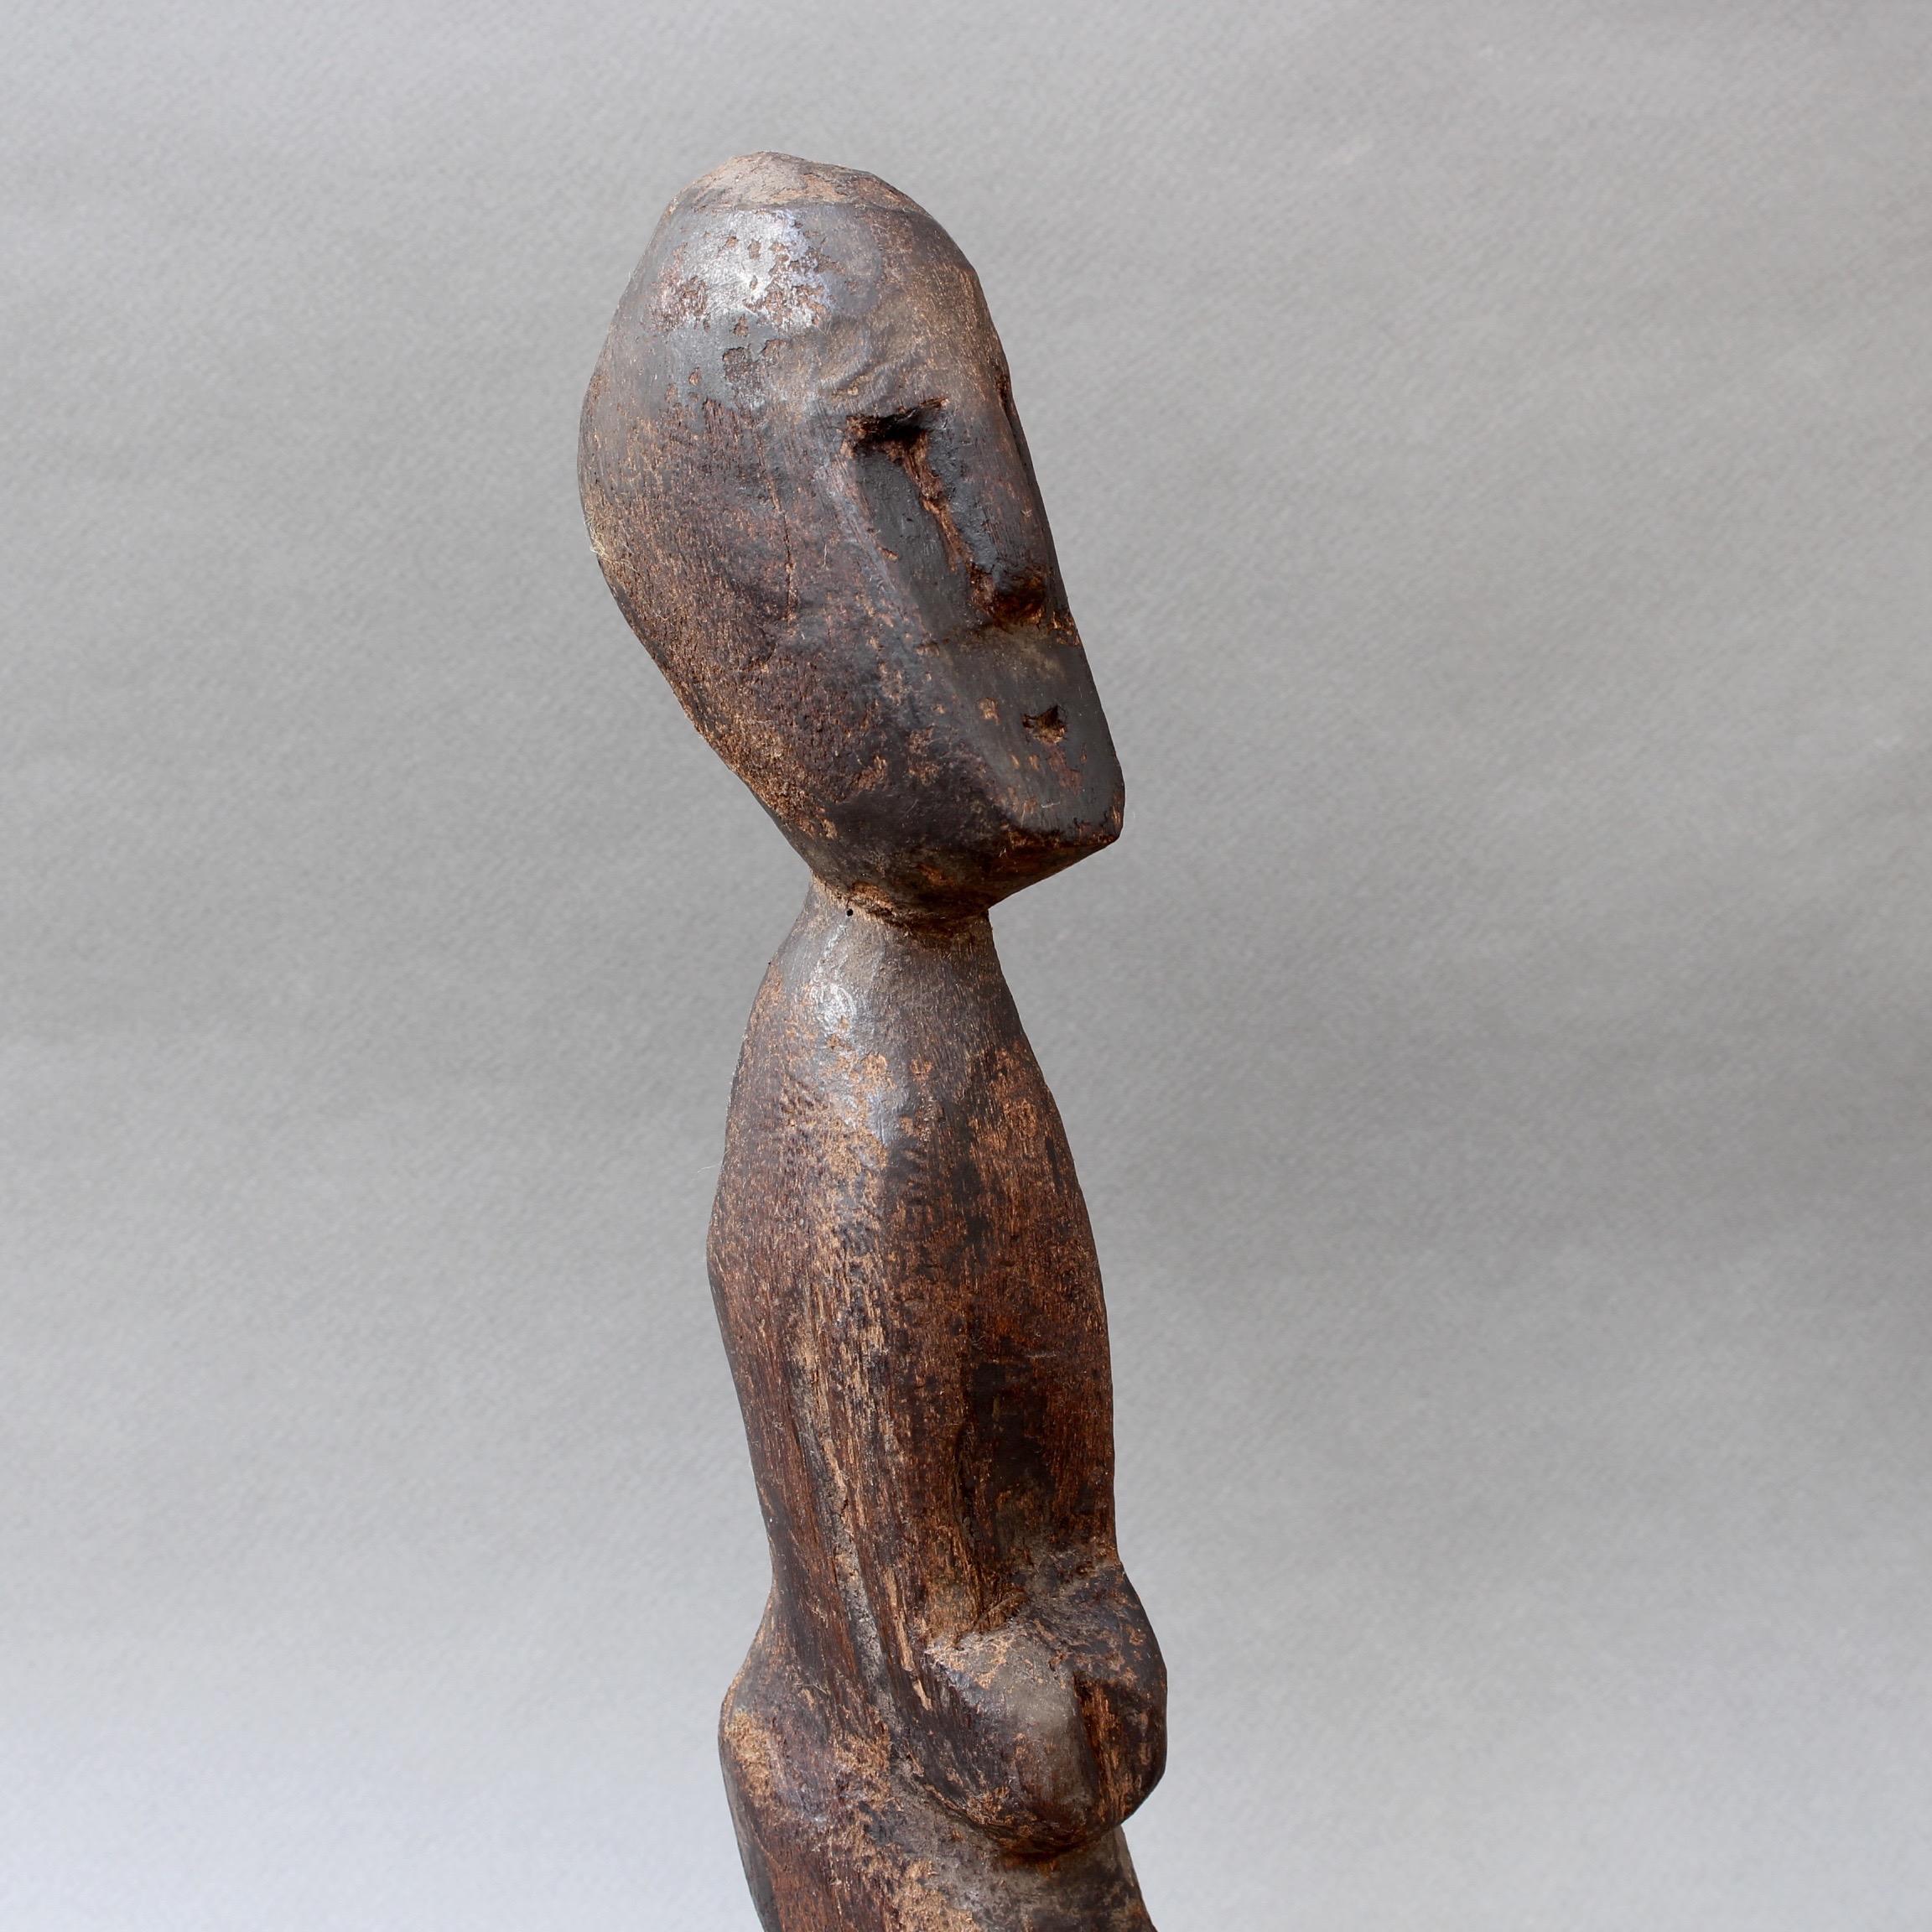 Wooden Carving / Sculpture of Kneeling Wooden Figure from Timor, Indonesia 1